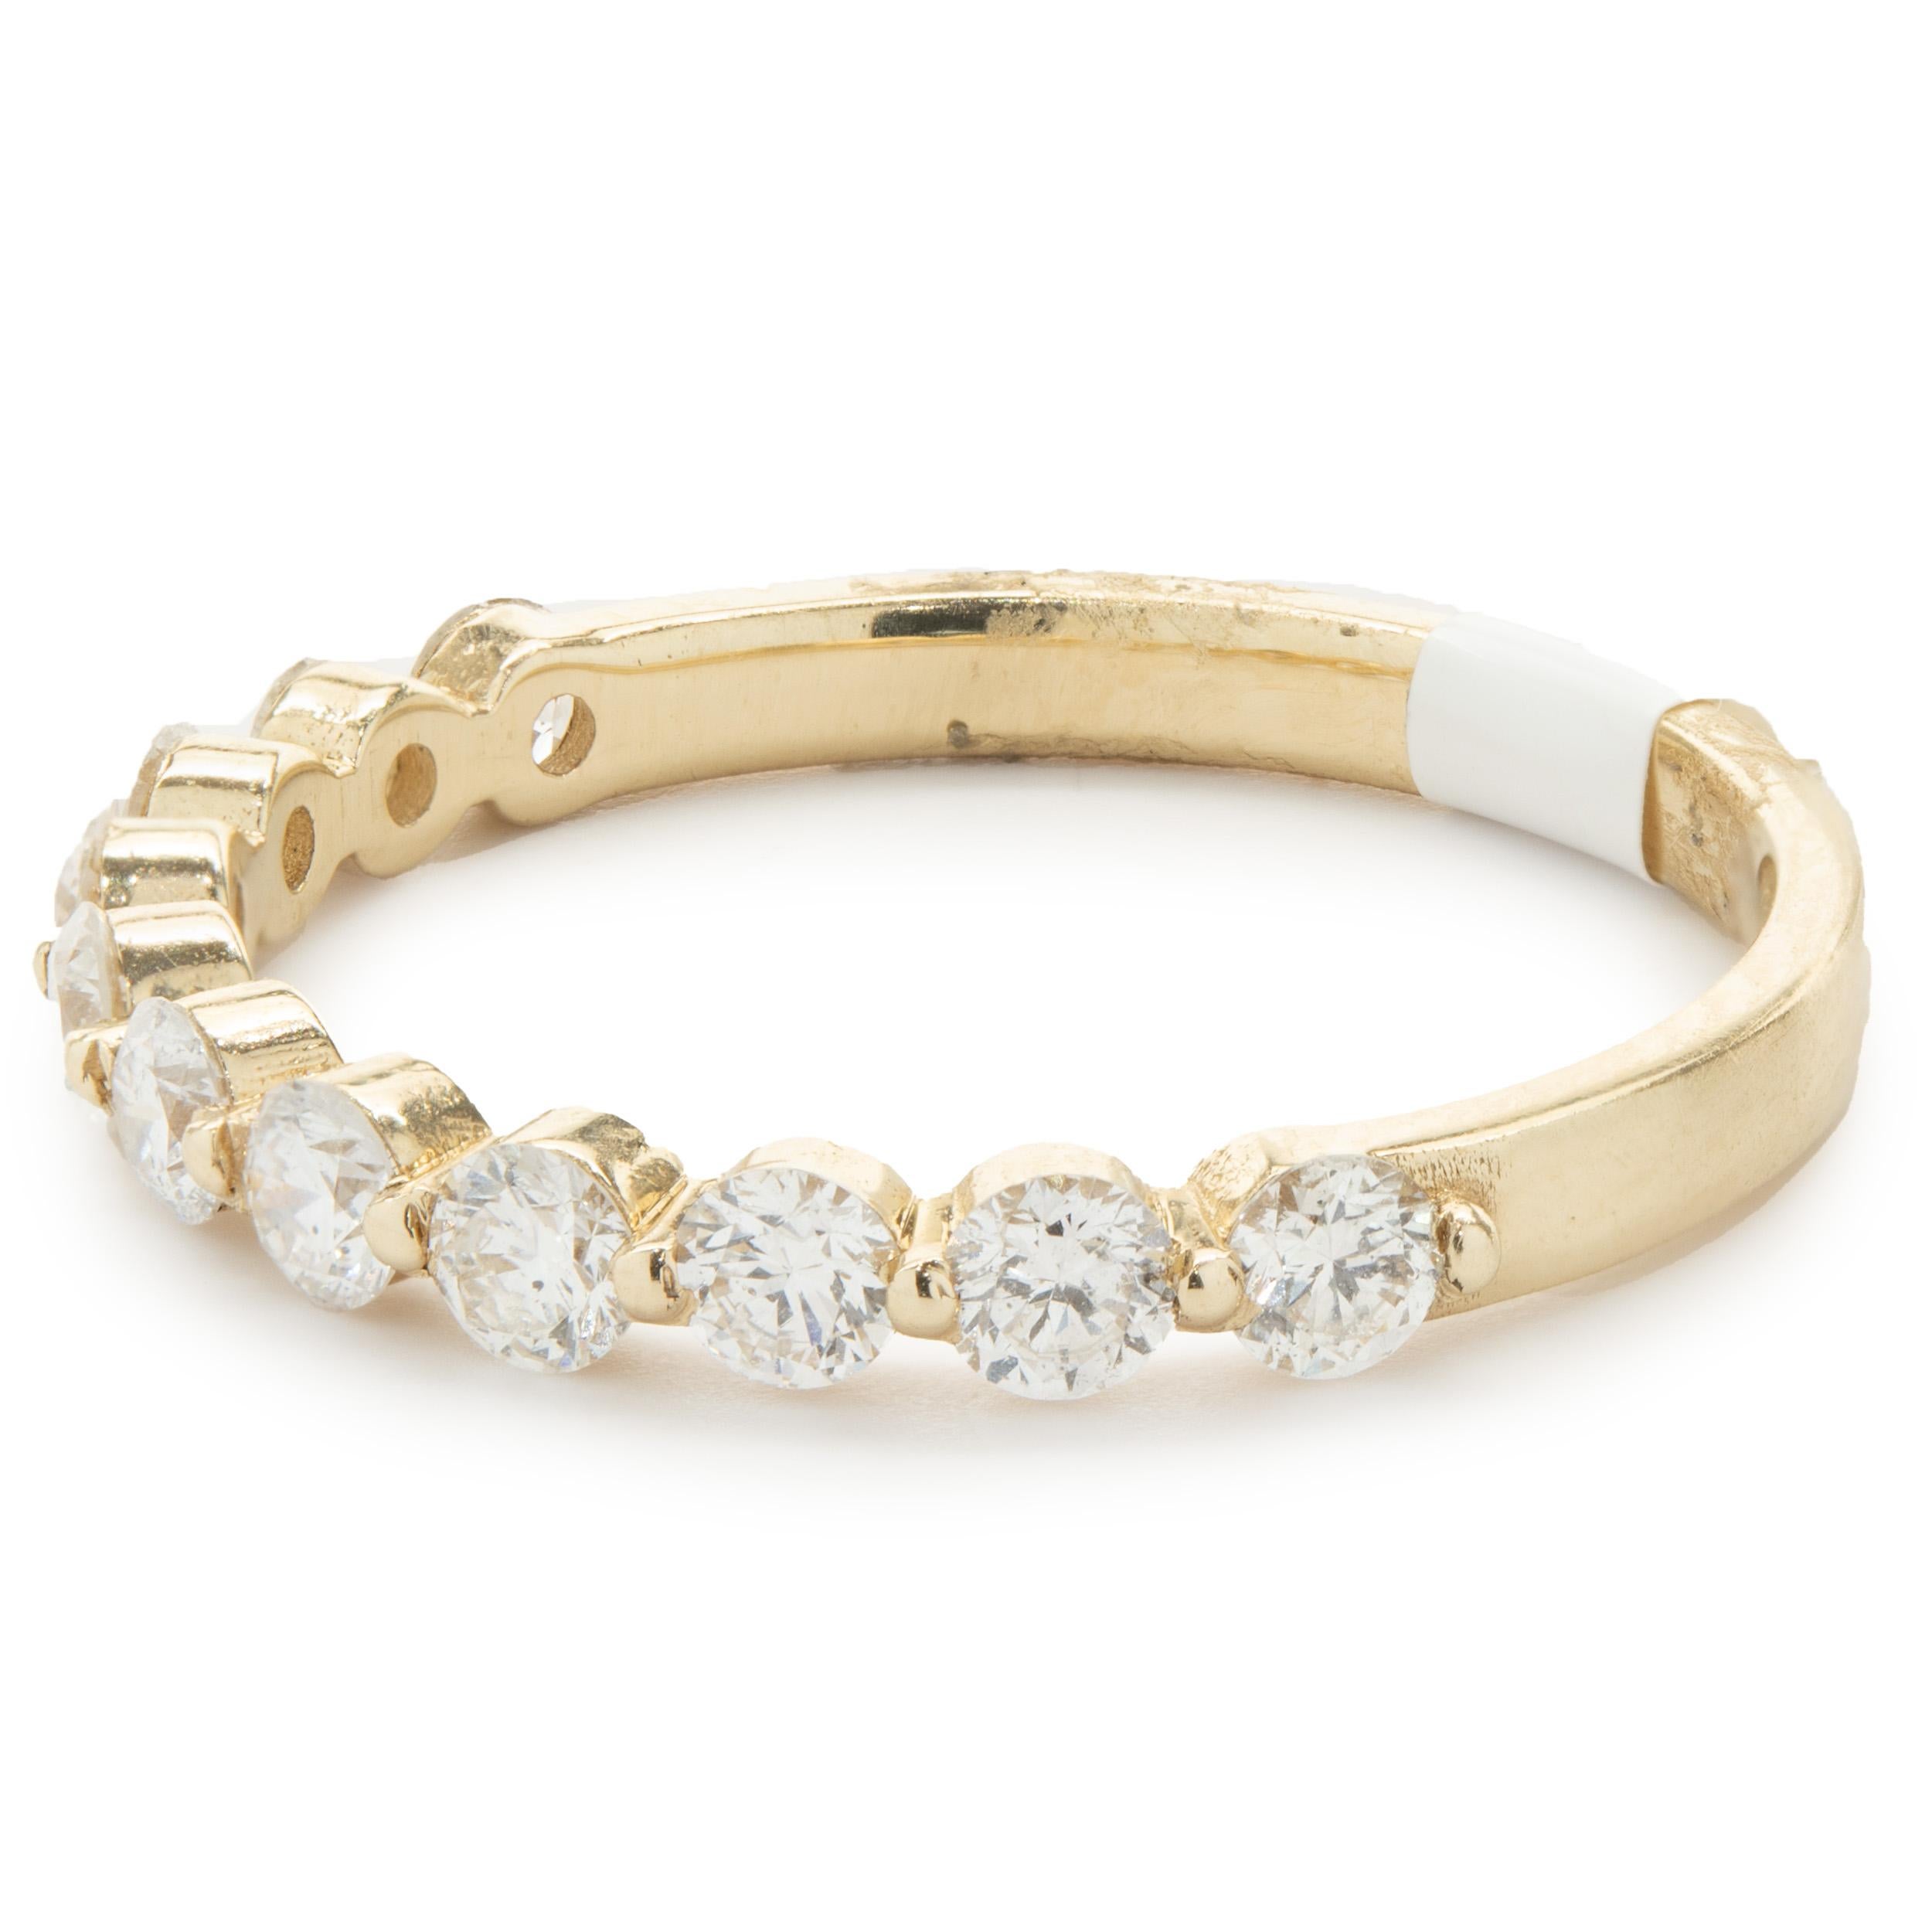 14 Karat Yellow Gold Shared Prong Diamond Band In Excellent Condition For Sale In Scottsdale, AZ